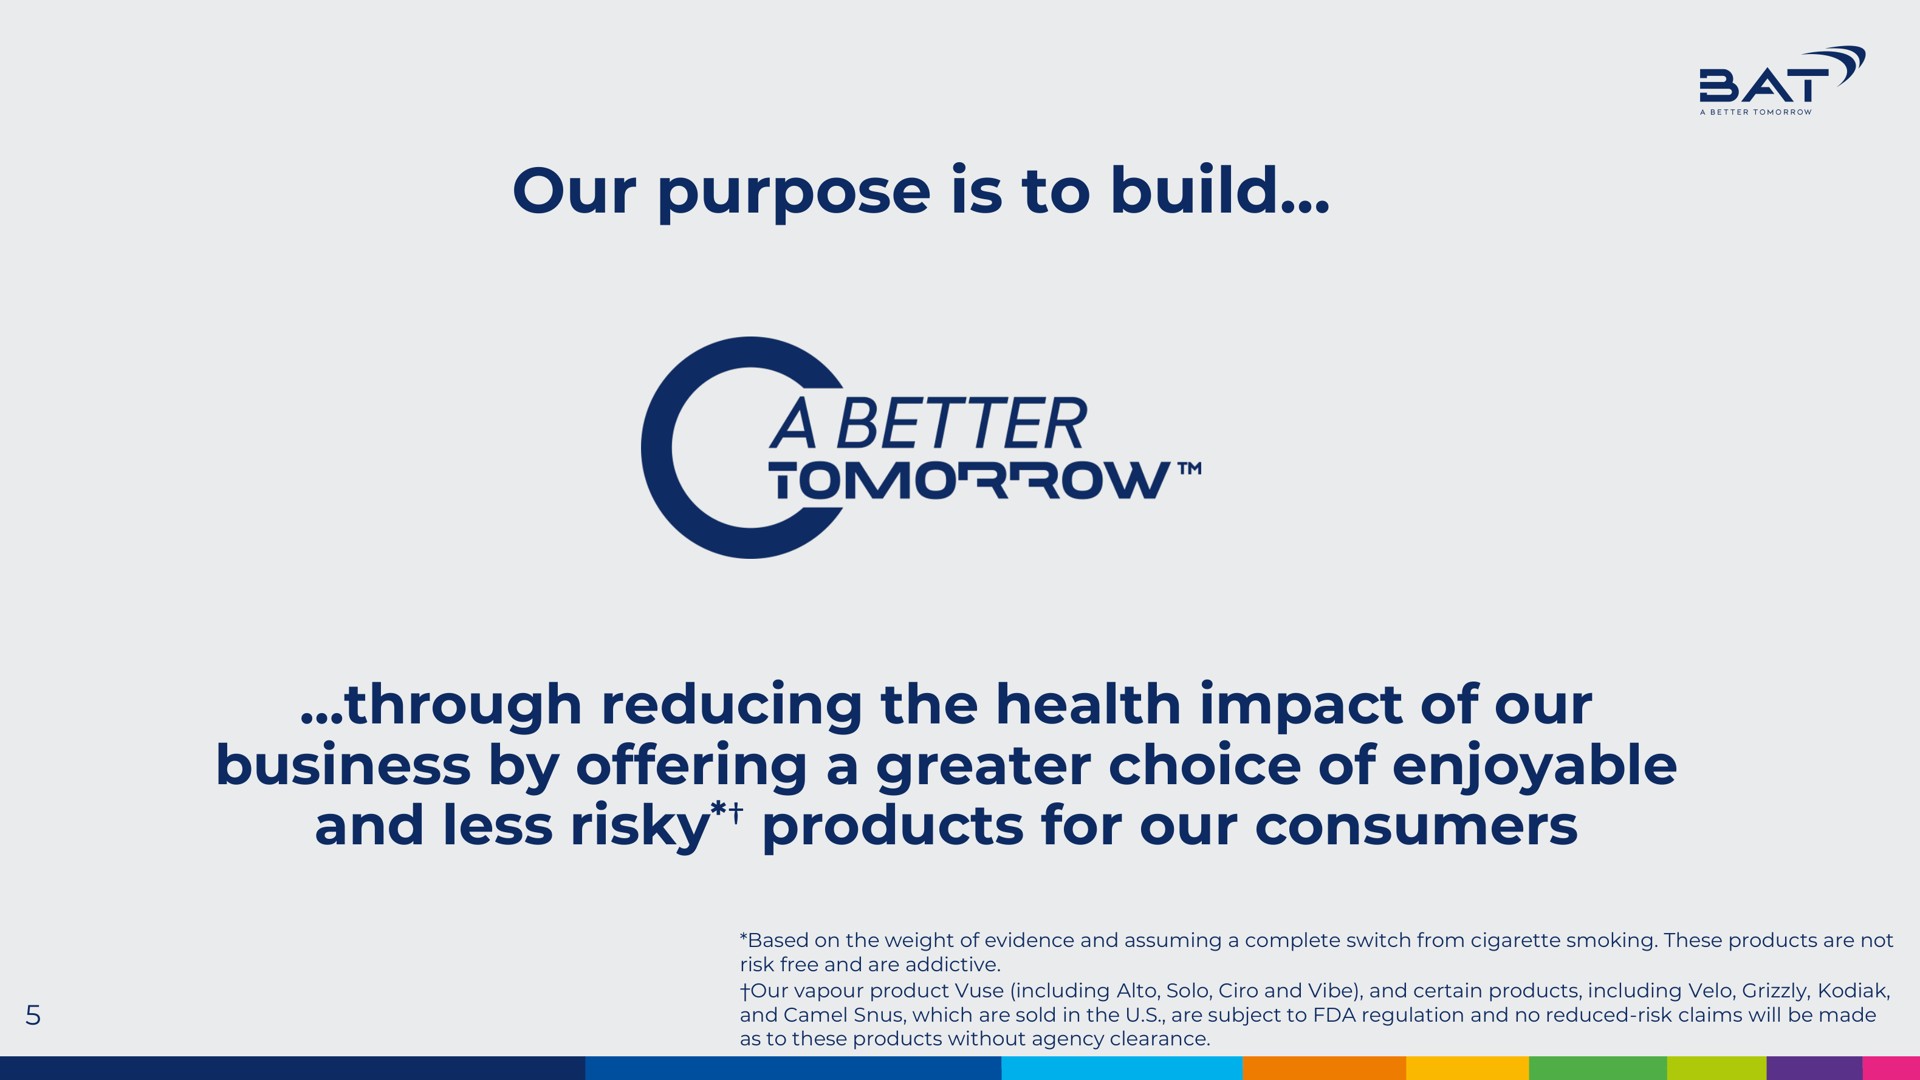 our purpose is to build a better tomorrow through reducing the health impact of business by offering a greater choice of enjoyable and less risky products for consumers | BAT